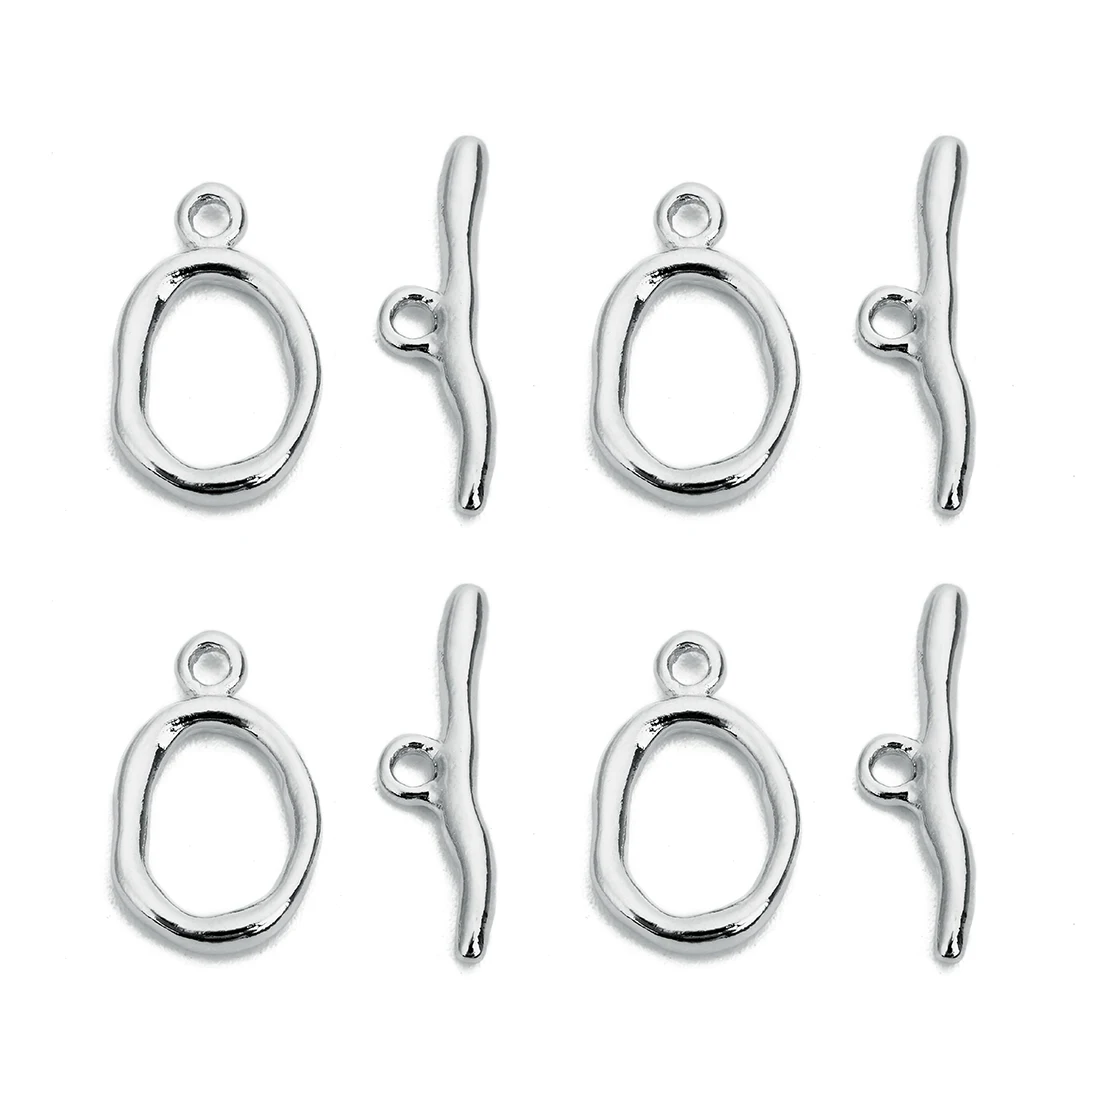 

5 Sets/lot Irregular Curved OT Clasps Connectors Toggle Clasp For Jewelry Making Necklace Bracelet Hooks Accessories Findings